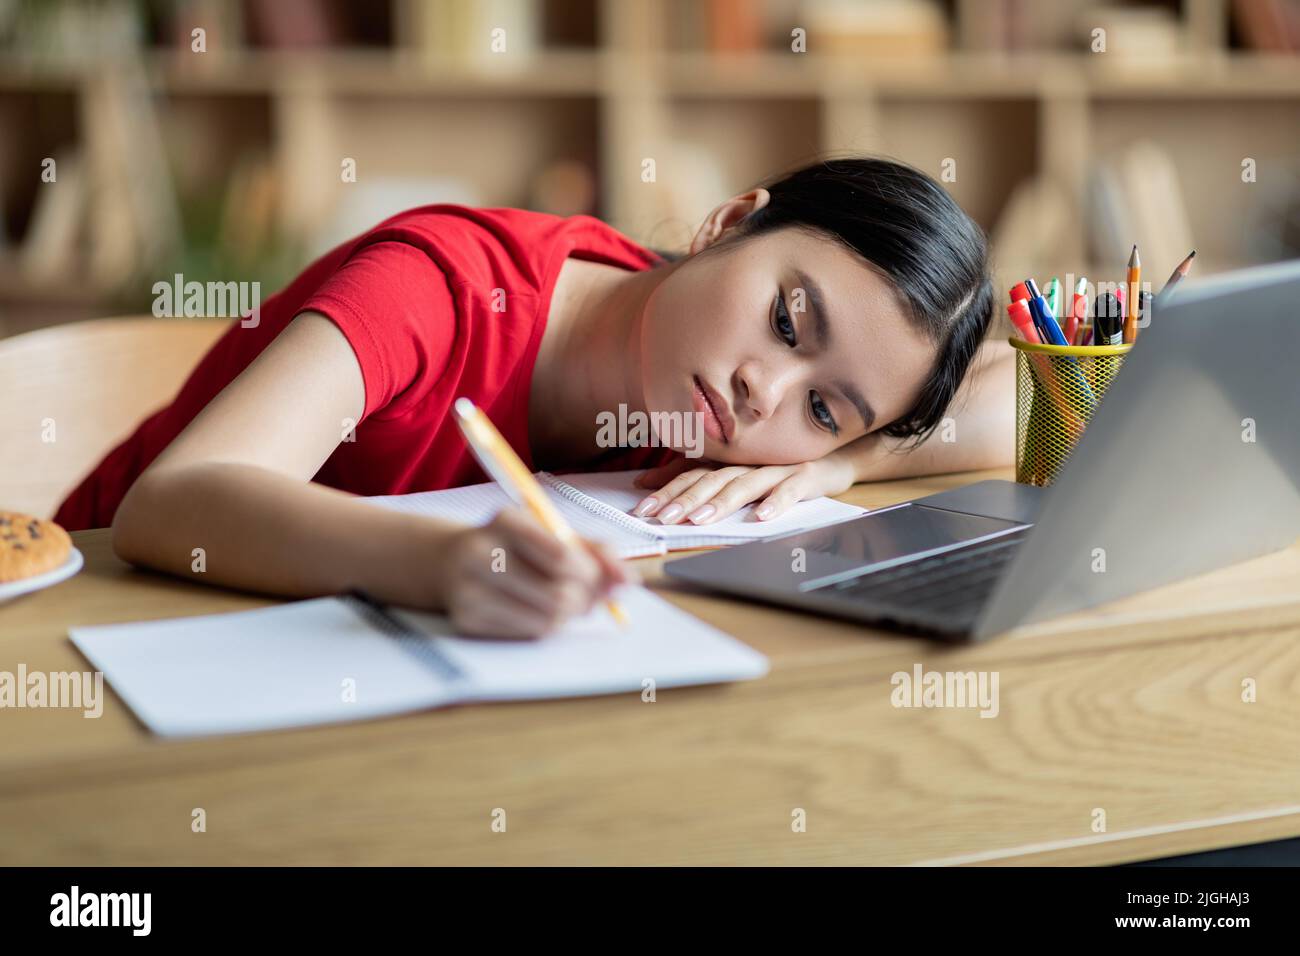 Tired adolescence japanese female student lies on table near computer in room interior Stock Photo